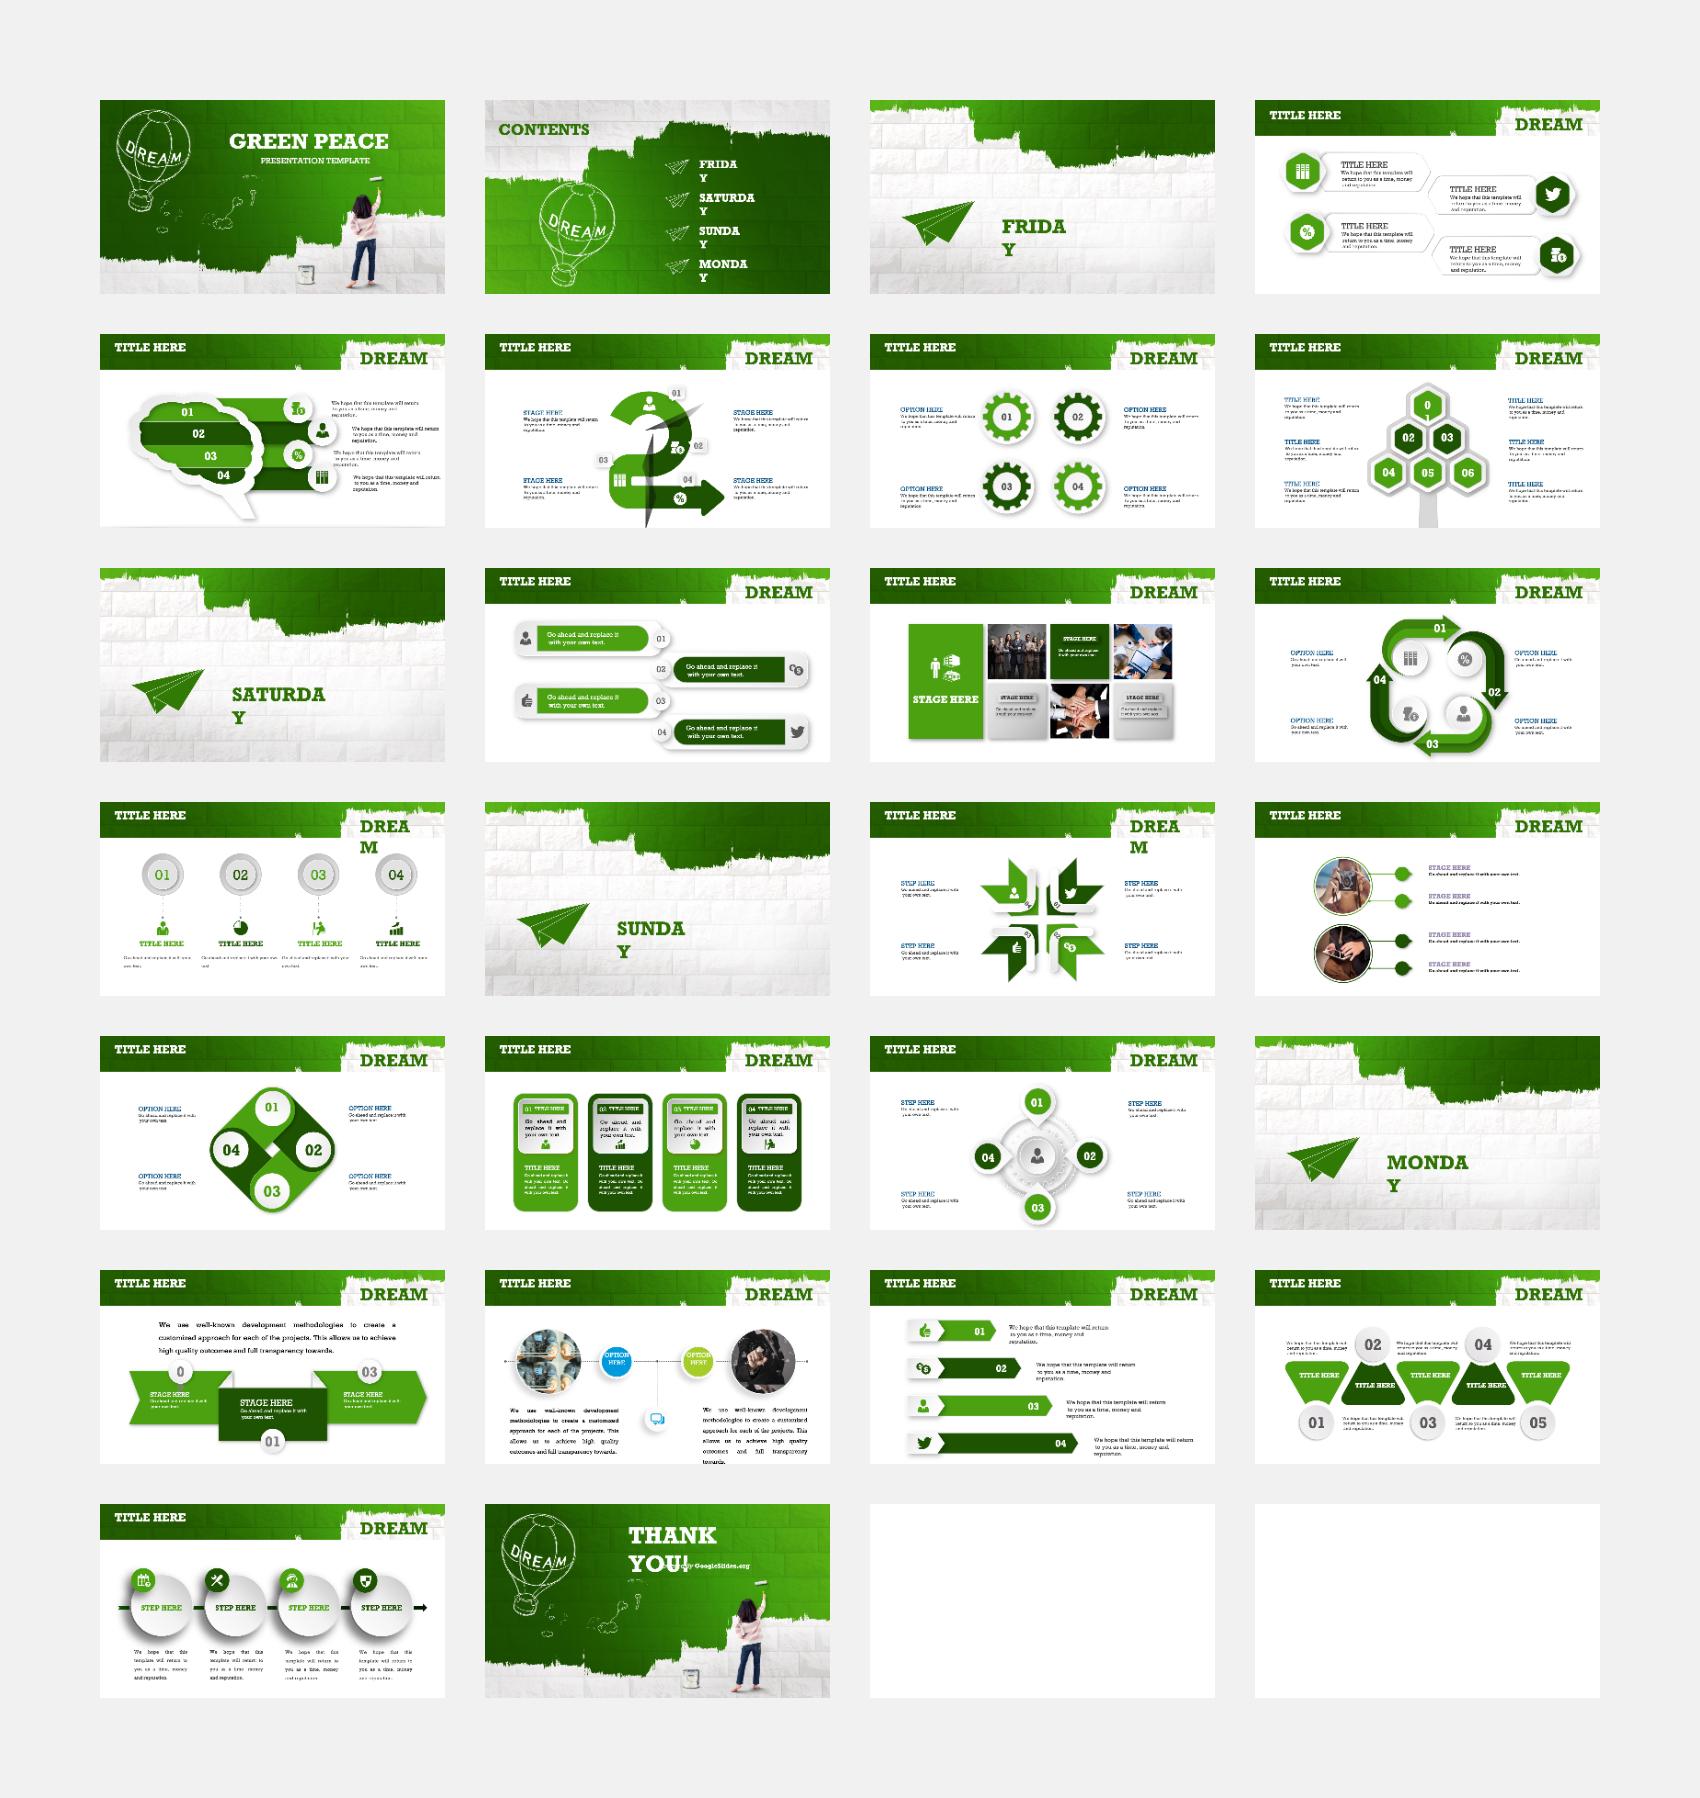 Green Peace Google Slides has a green background